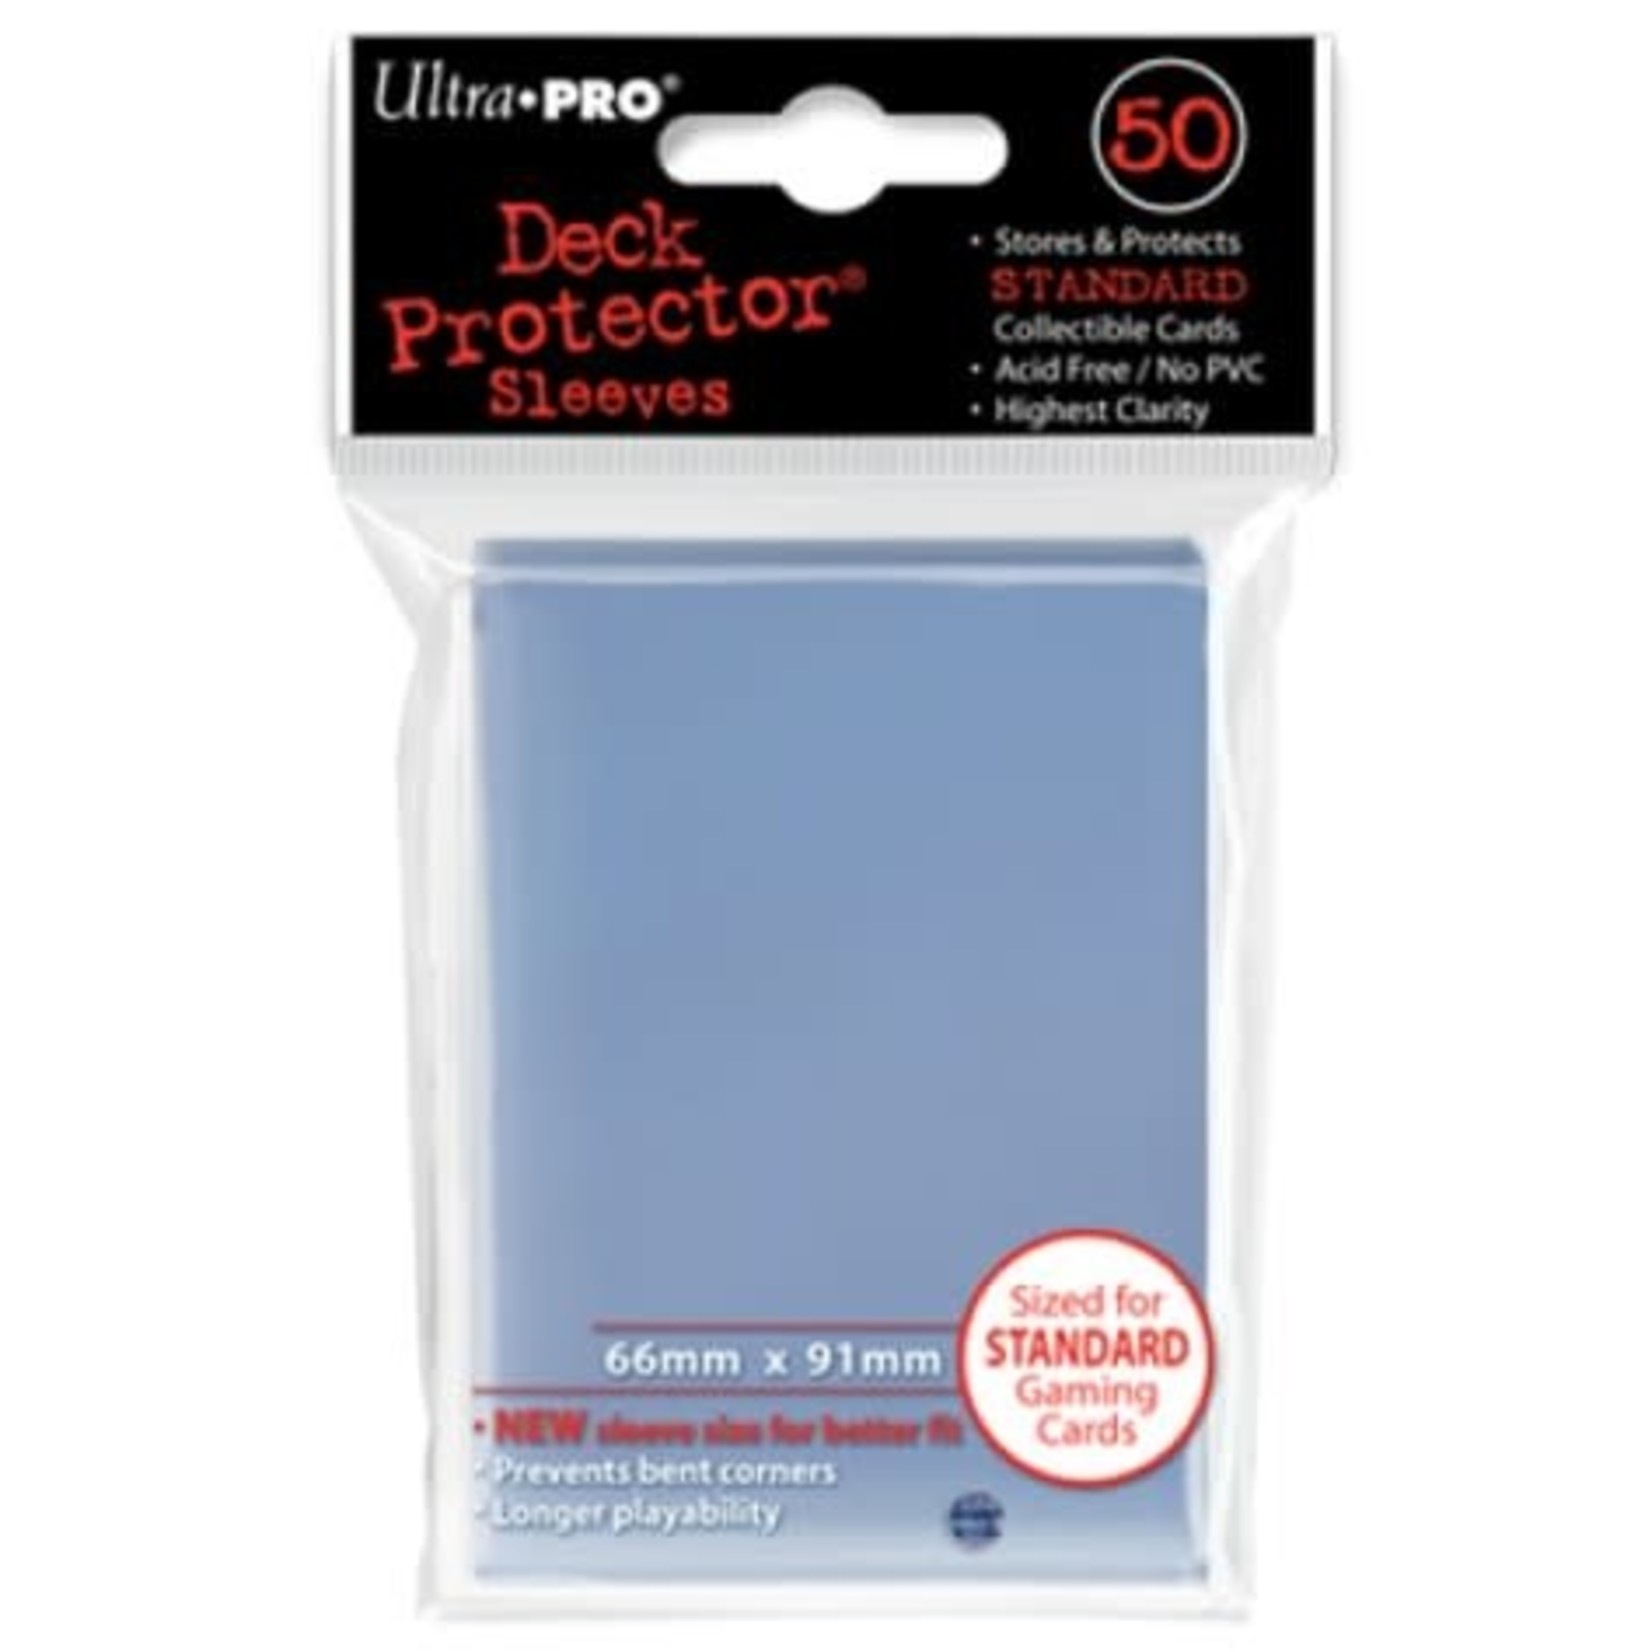 Ultra Pro Ultra Pro Pro-Gloss Standard Deck Protector Sleeves Clear 50 ct